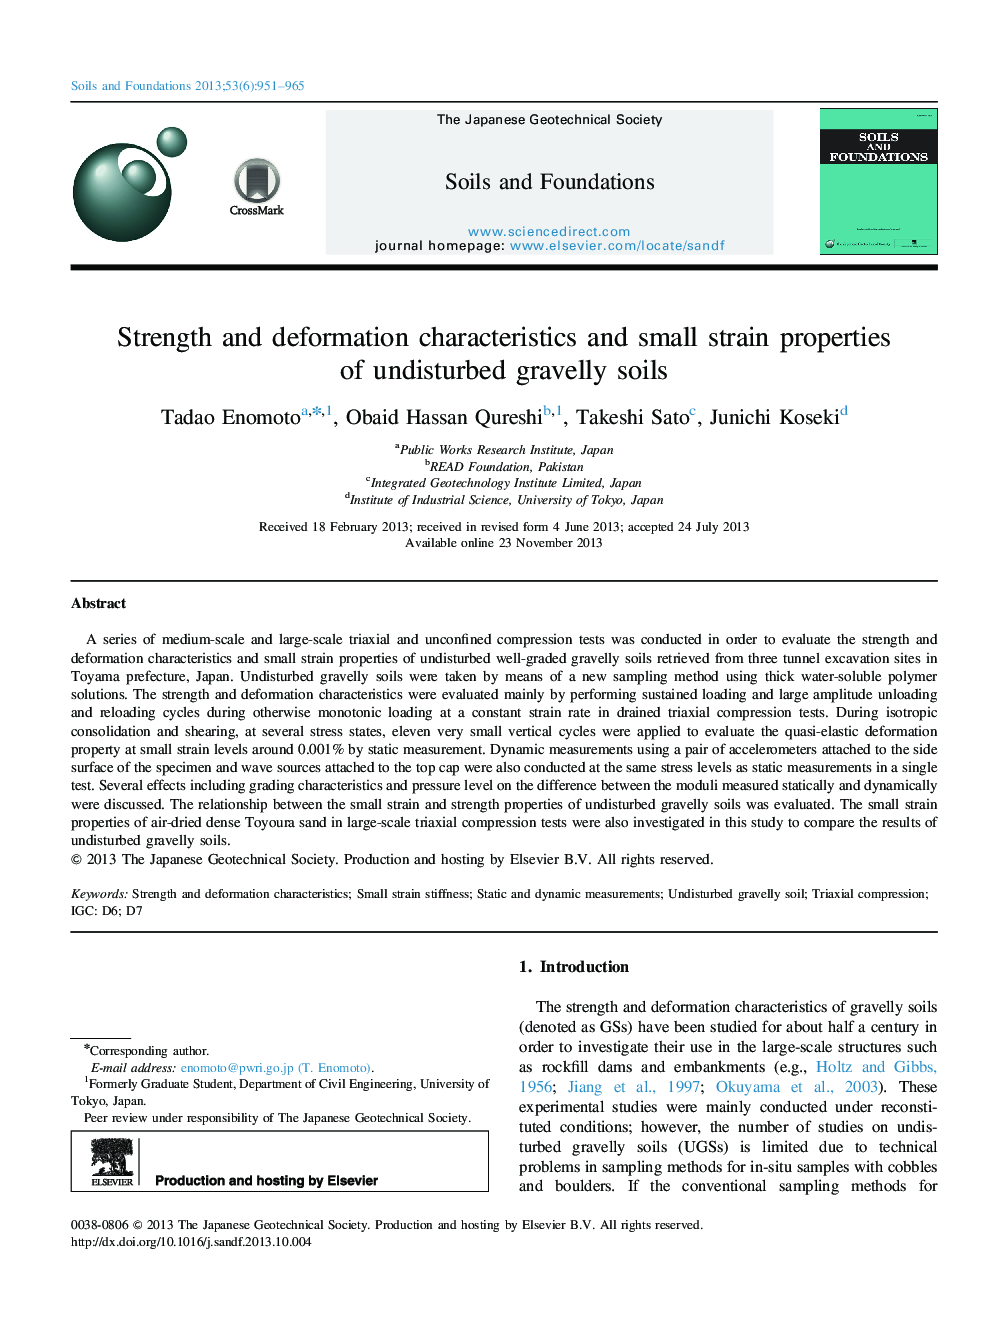 Strength and deformation characteristics and small strain properties of undisturbed gravelly soils 